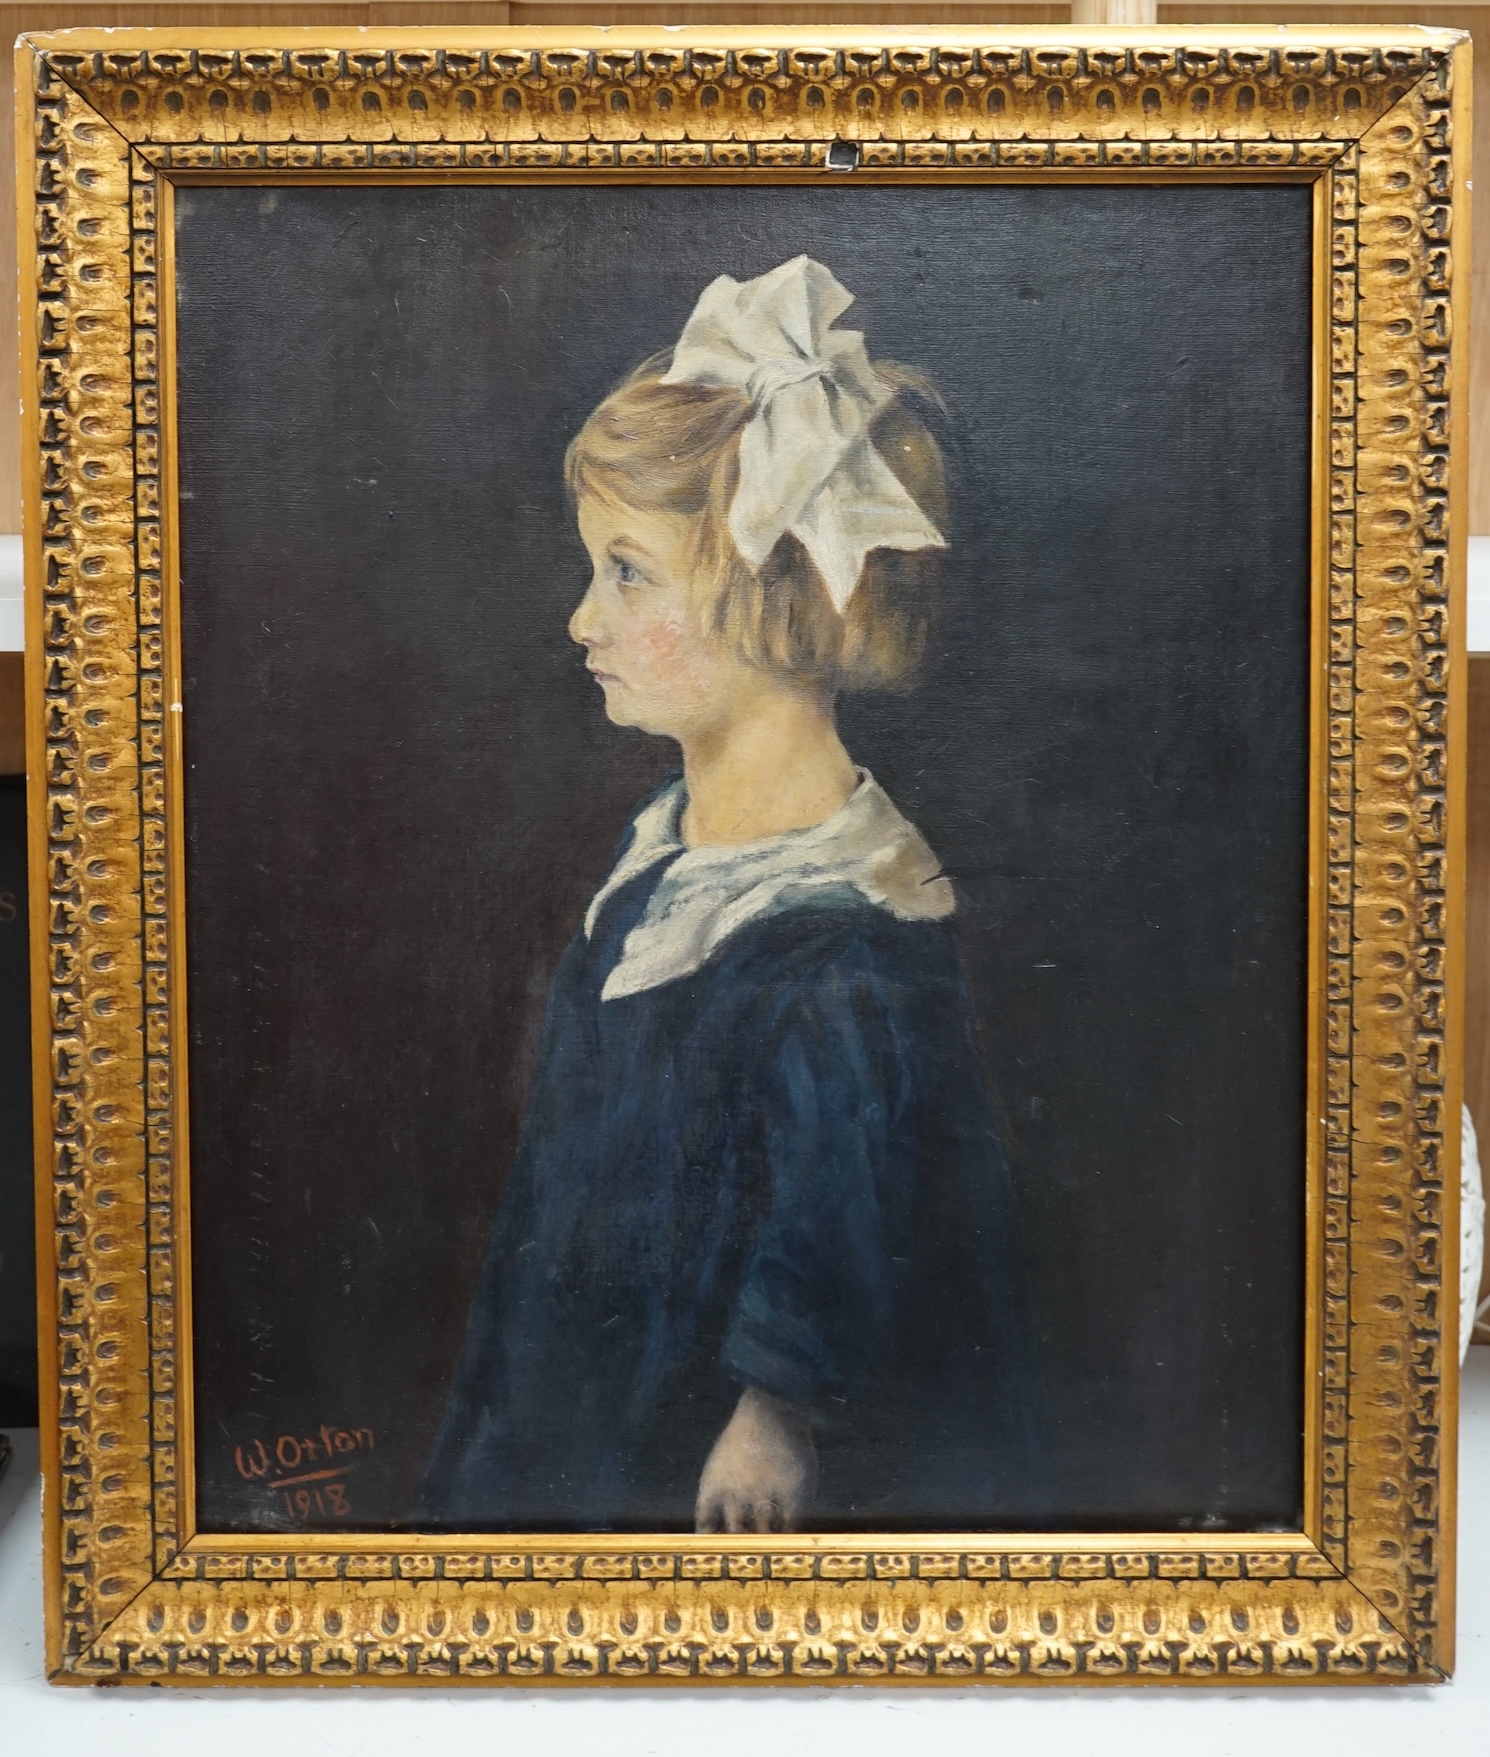 William Orton, oil on canvas, Portrait of a young girl, 'Peggy', signed and dated 1918, Royal Academy Exhibition details verso, 60 x 50cm. Condition - fair, general wear commensurate with age